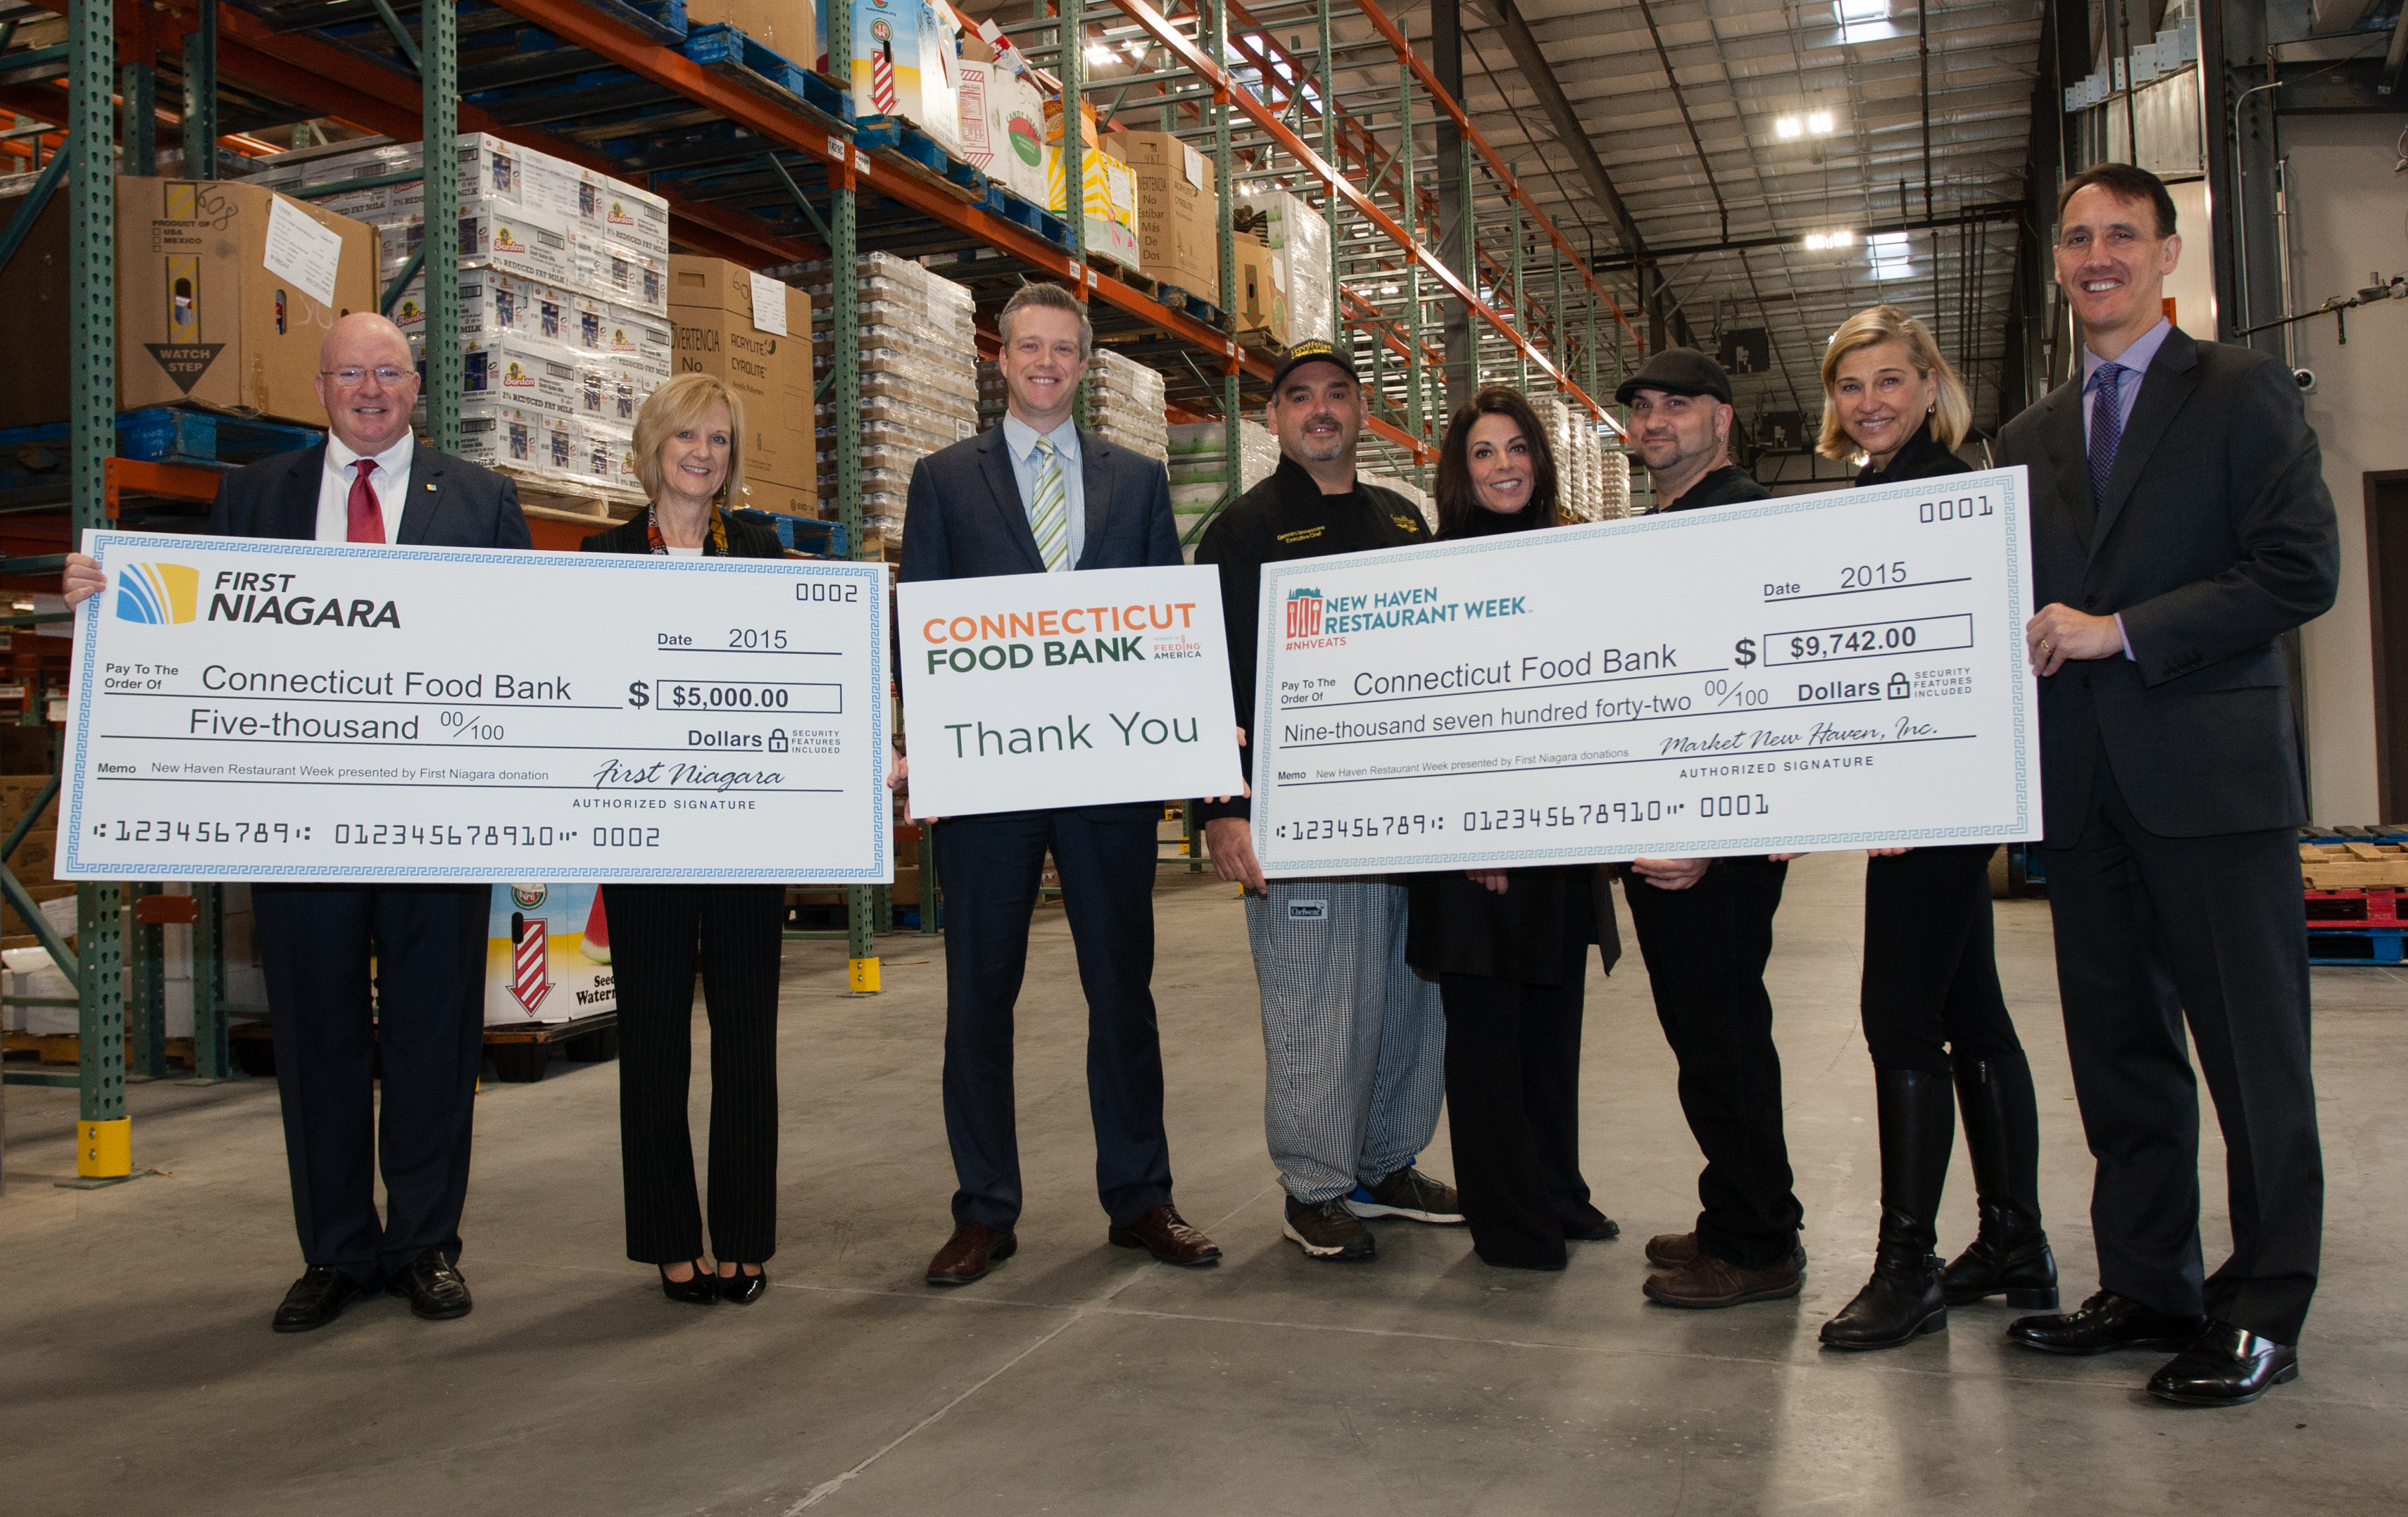 Check presentation to the Connecticut Food Bank. Appearing from left to right: Jeff Hubbard (First Niagara), Karen Crane (First Niagara), Michael Davidow (Connecticut Food Bank), Gerry Iannaccone (Goodfellas Restaurant), Andrea Coppla (Goodfellas Restaurant), Eddie Lavorgna (Basta Trattoria), Anne Worcester (Market New Haven) and Bradley Hardy (First Niagara).